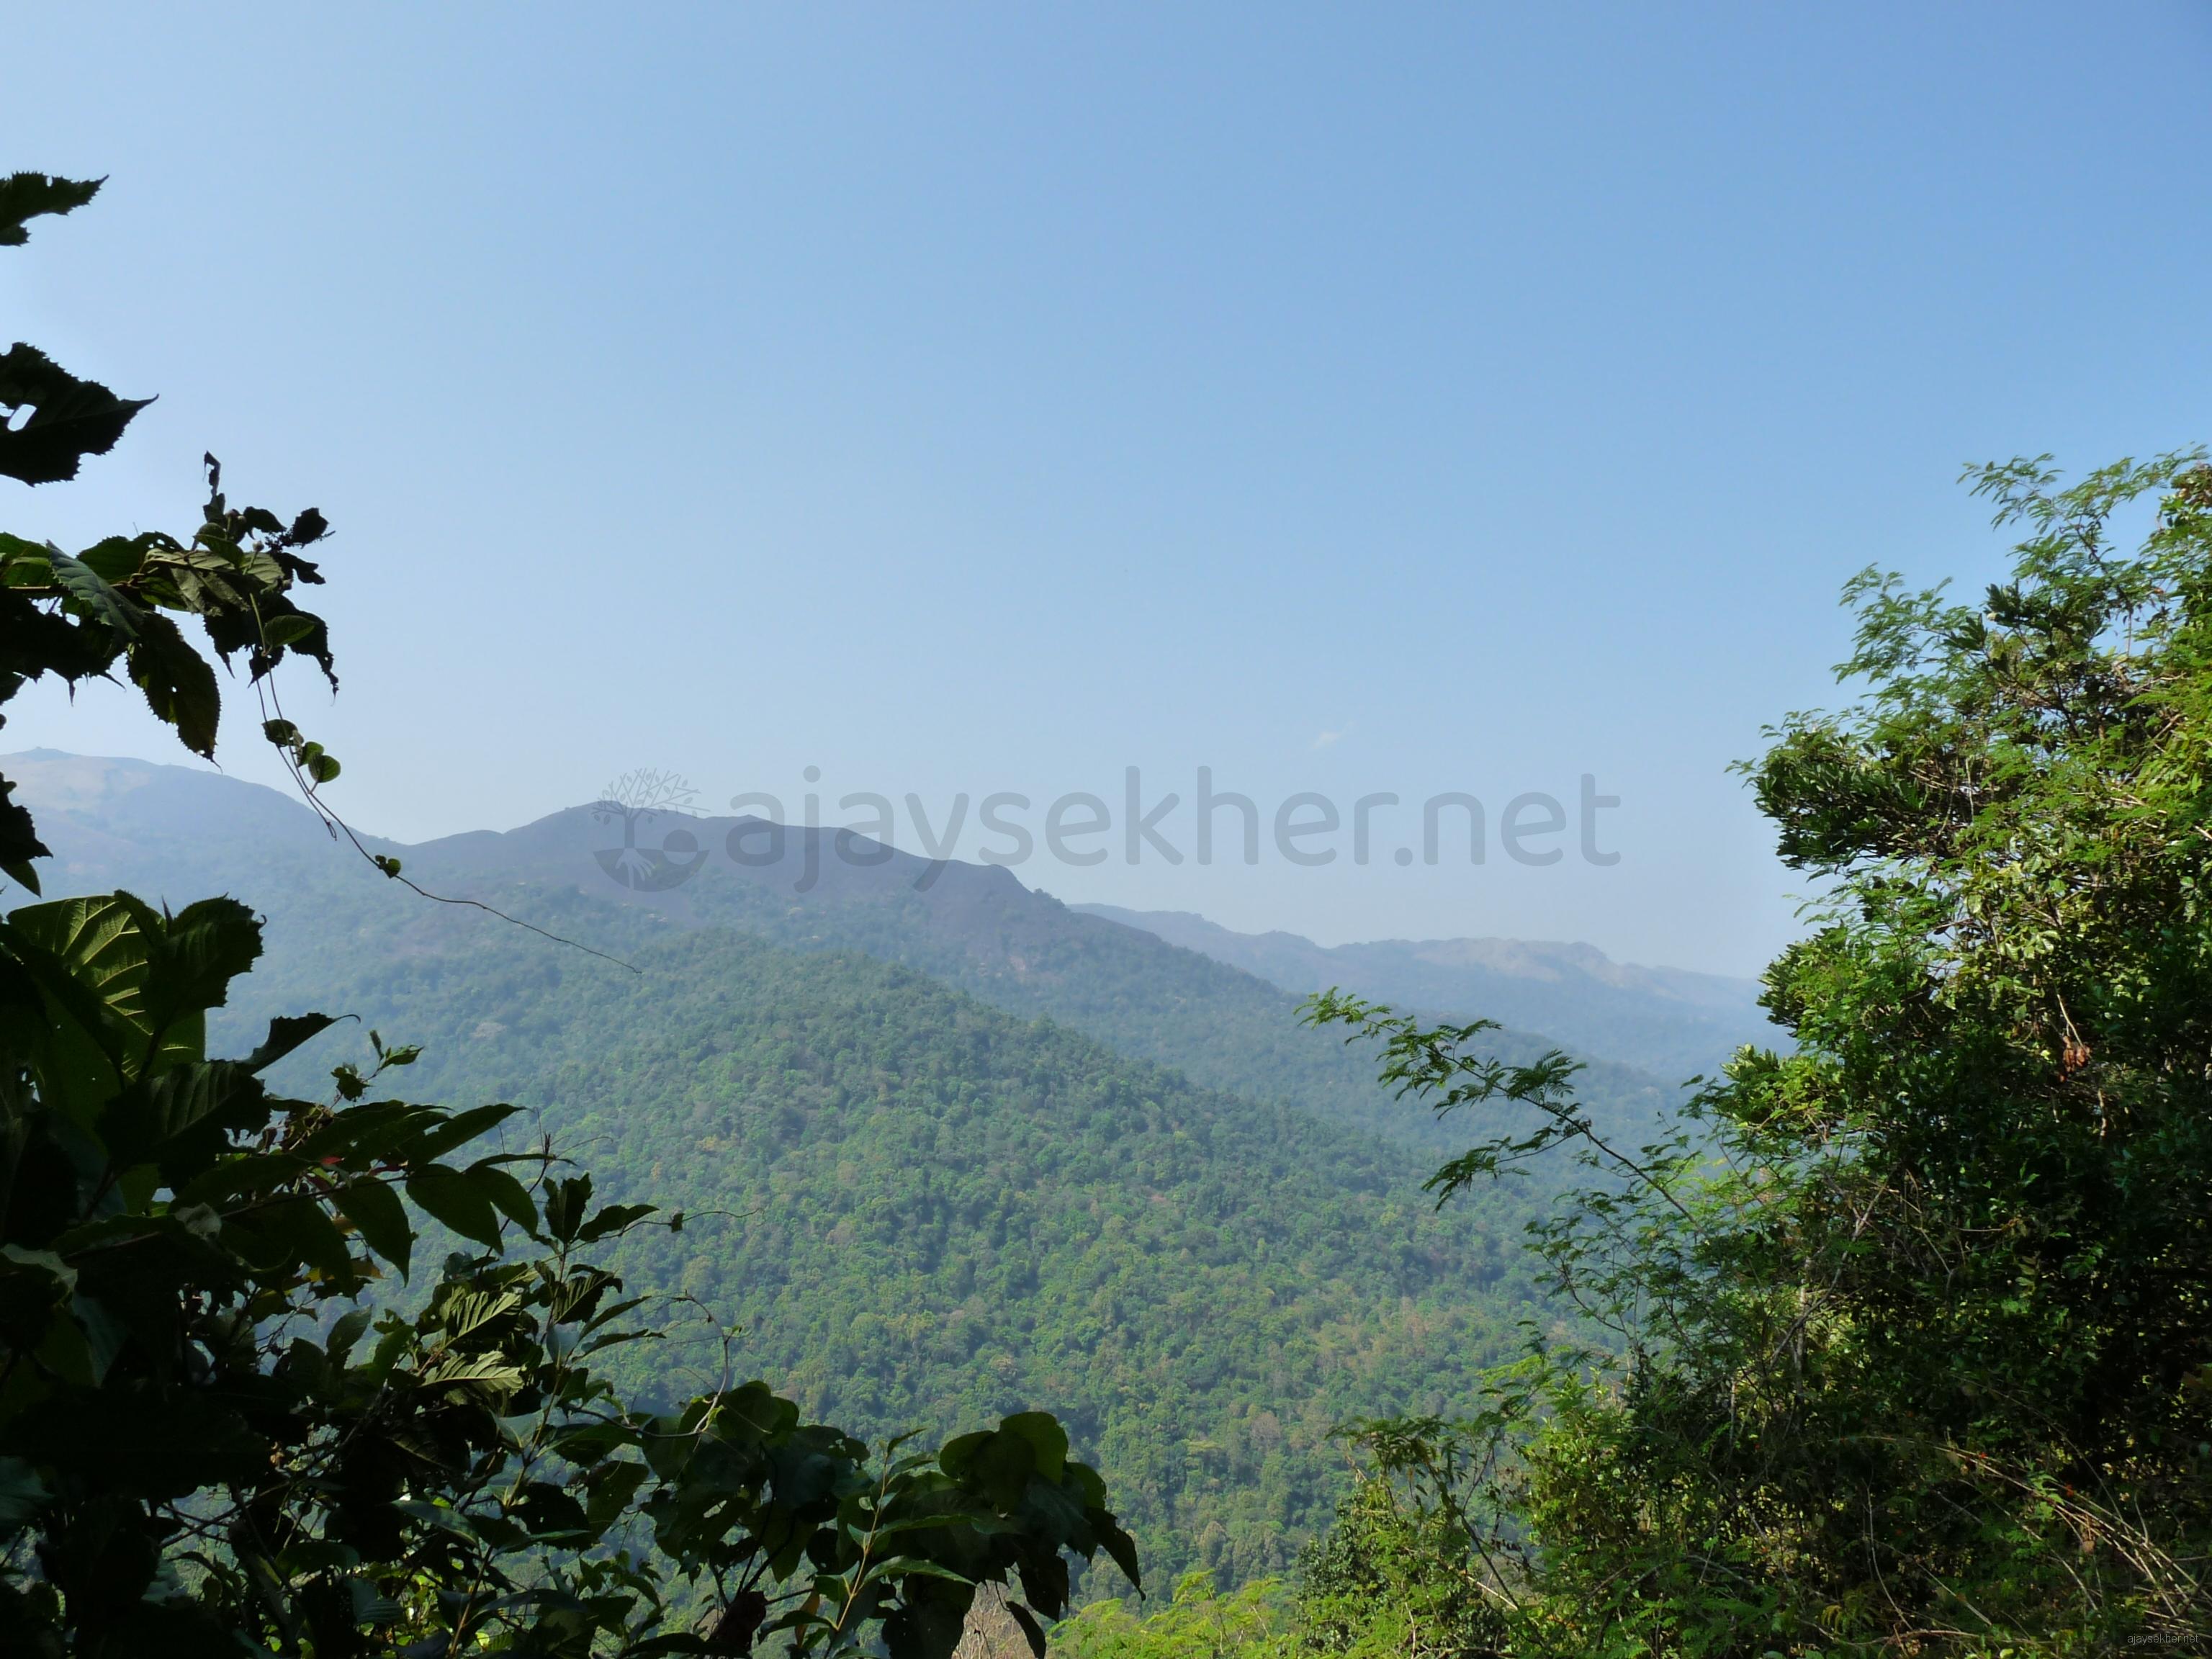 A view of Kottanchery and Ranipuram ranges from Talakavery road, Bhagamandala